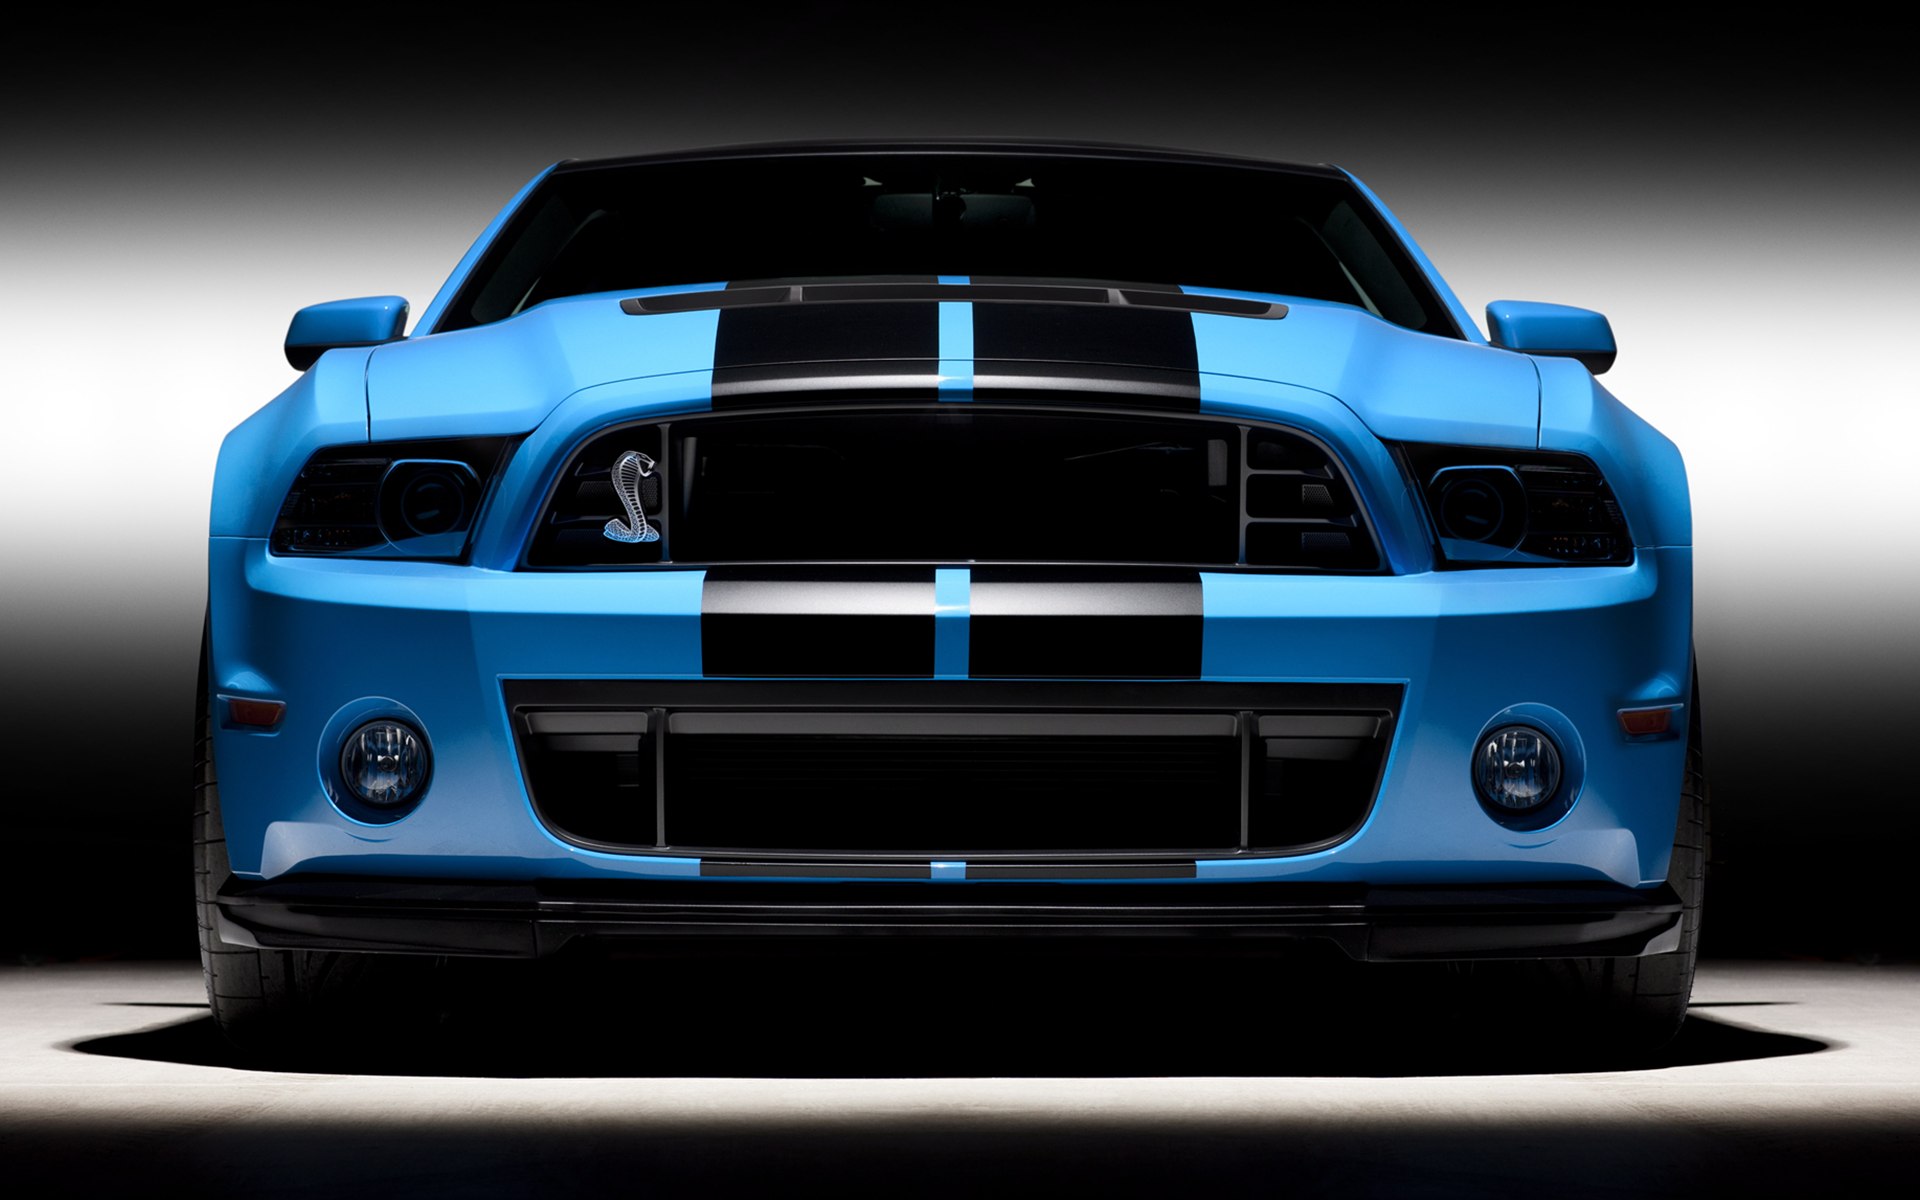 2013 wallpaper,land vehicle,vehicle,car,shelby mustang,automotive design